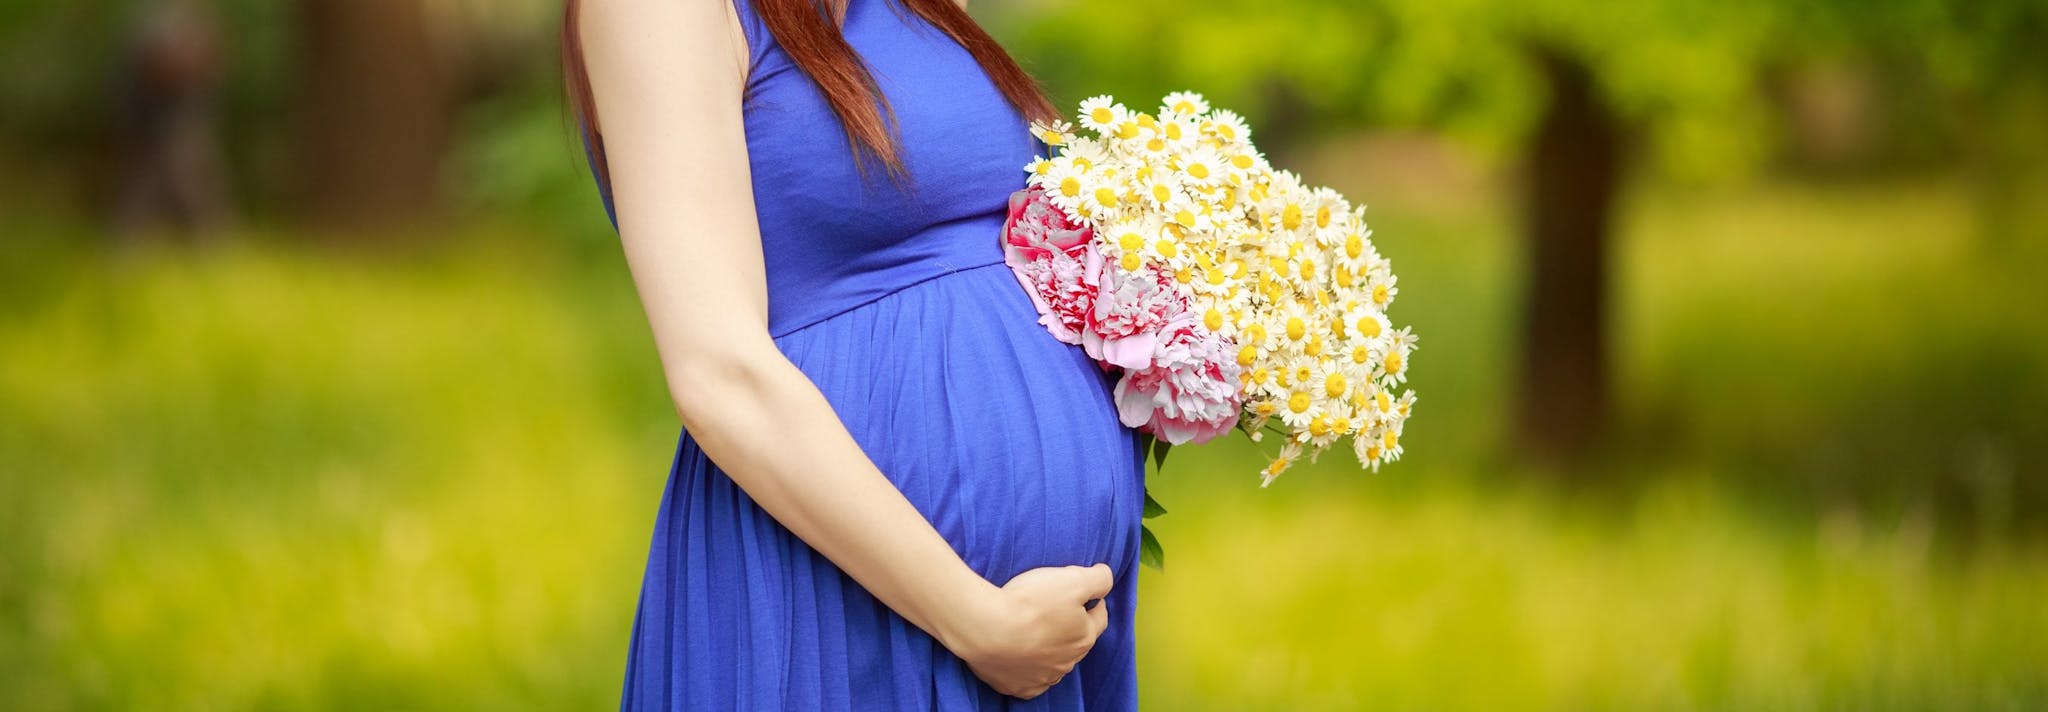 Finding the Right Doctor - High Risk-Pregnancy